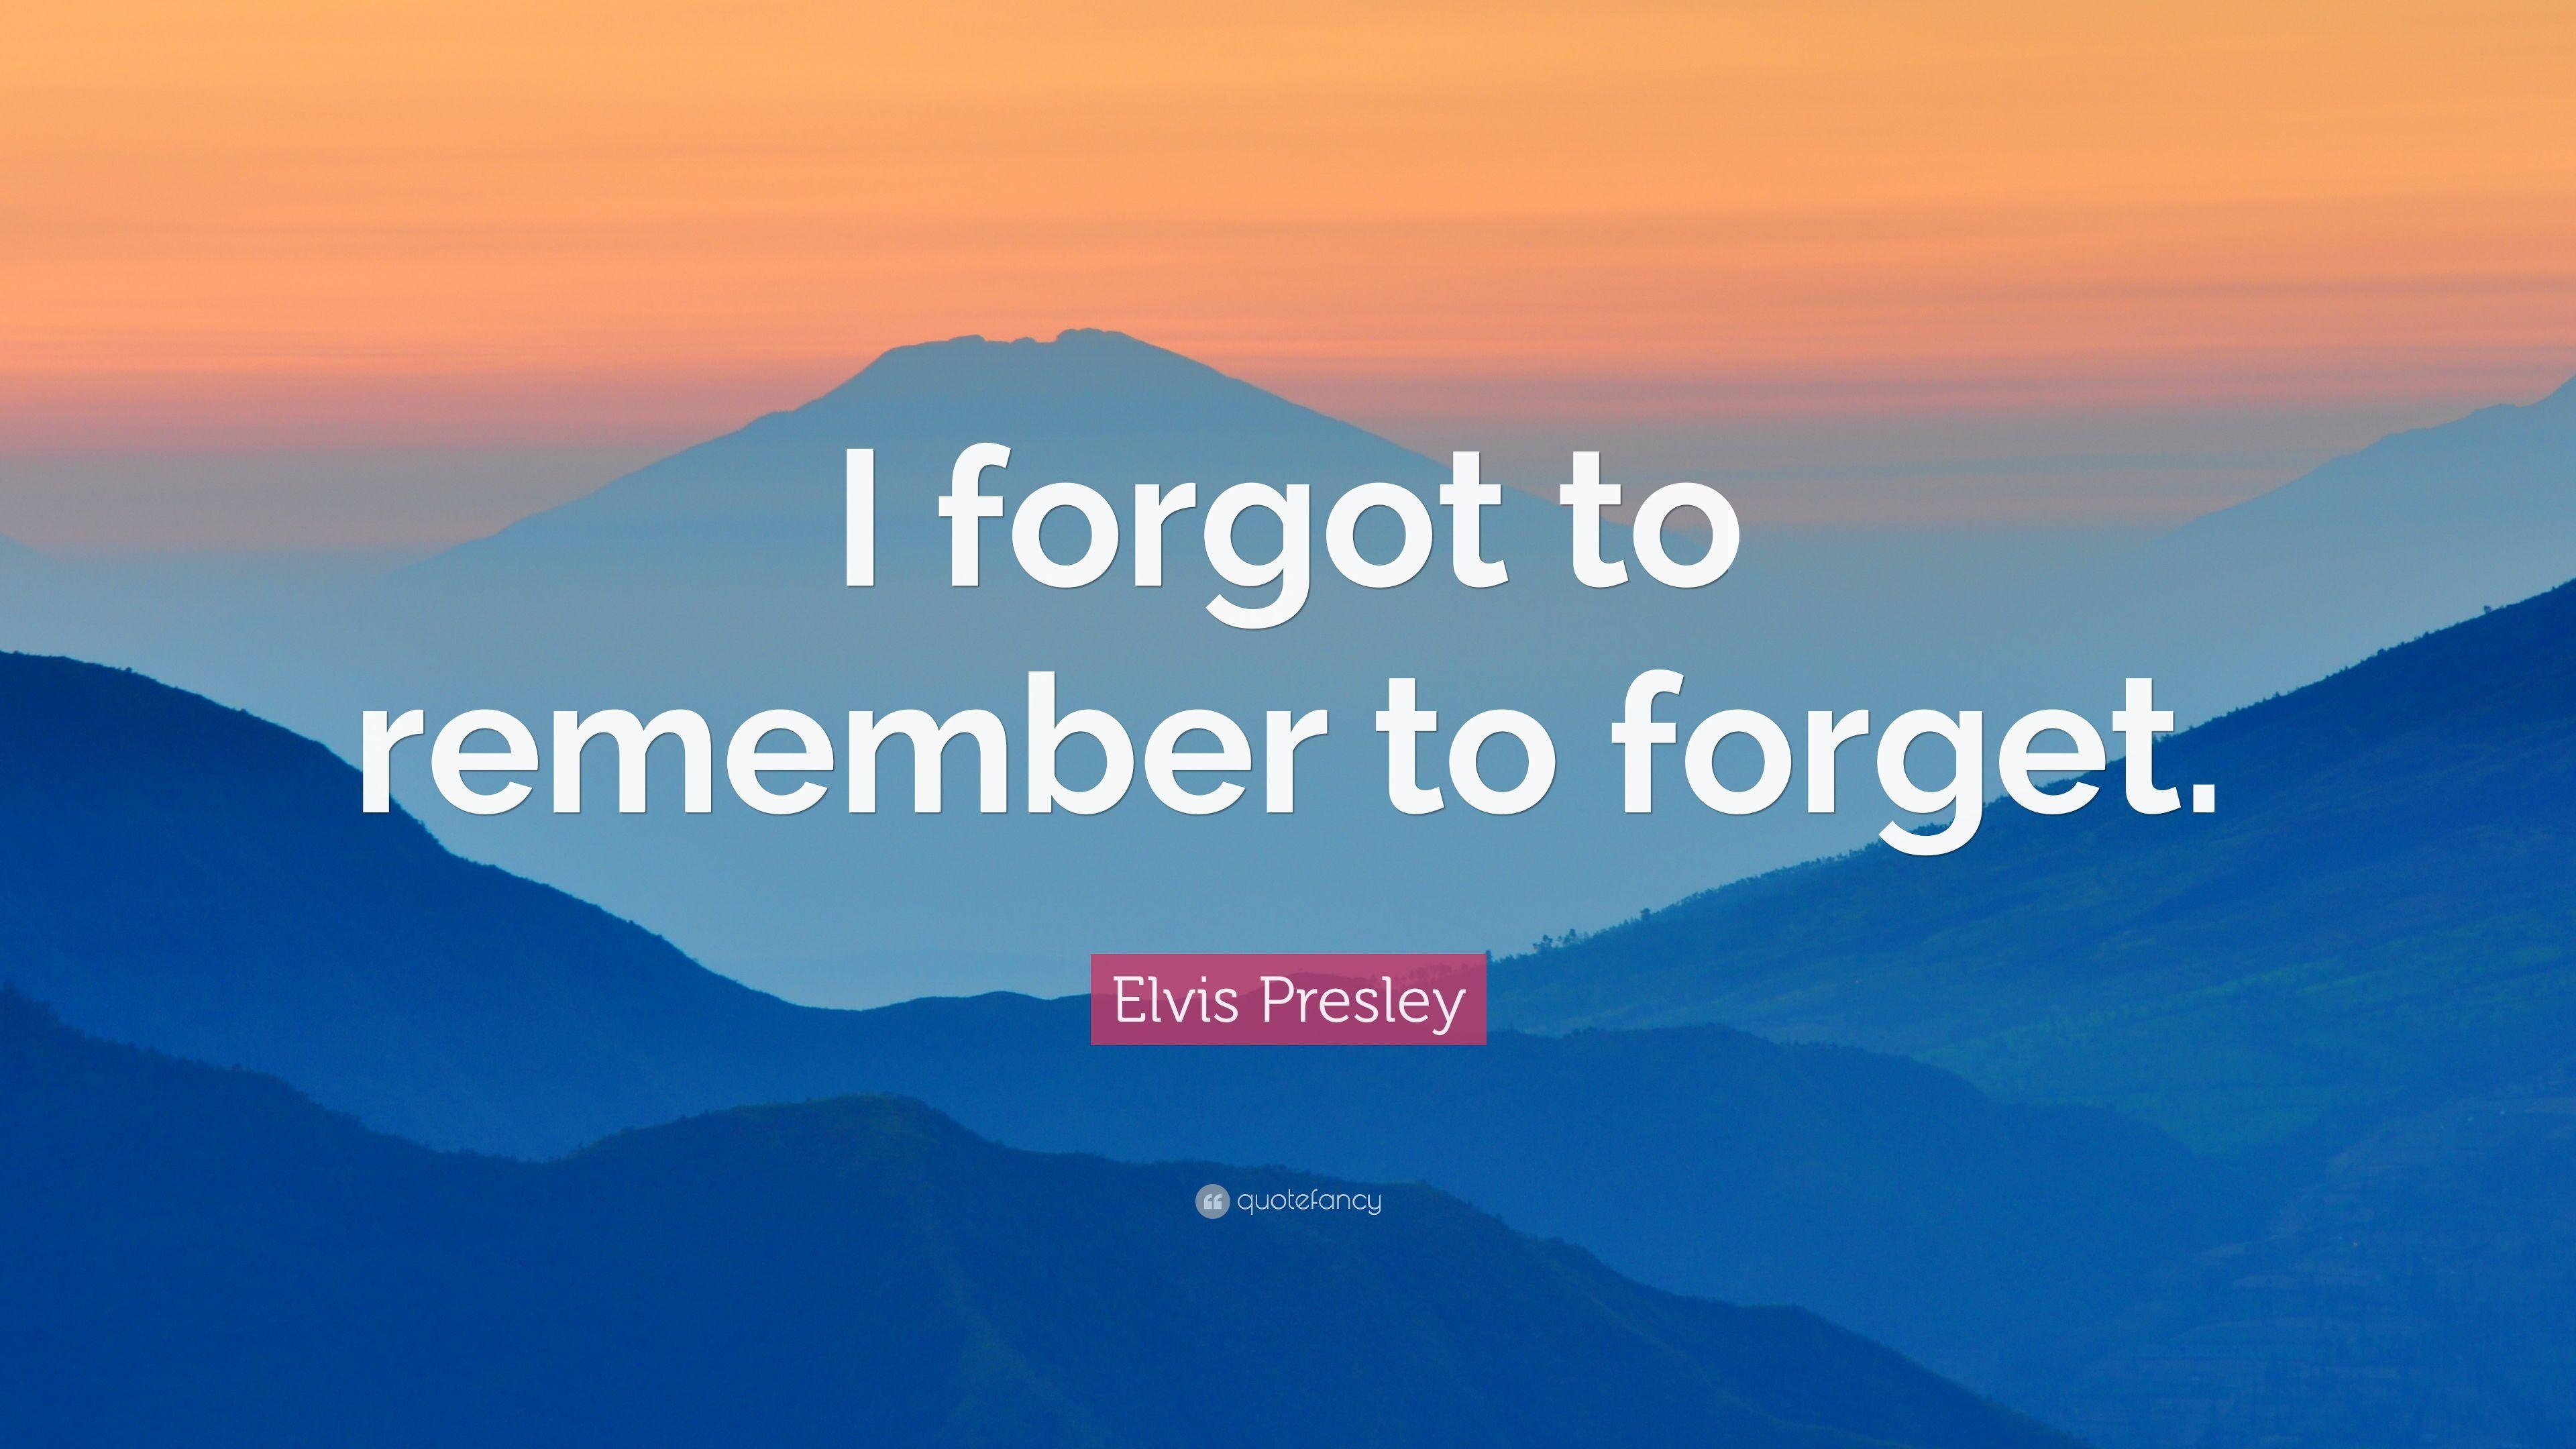 Elvis Presley Quote: “I forgot to remember to forget.”